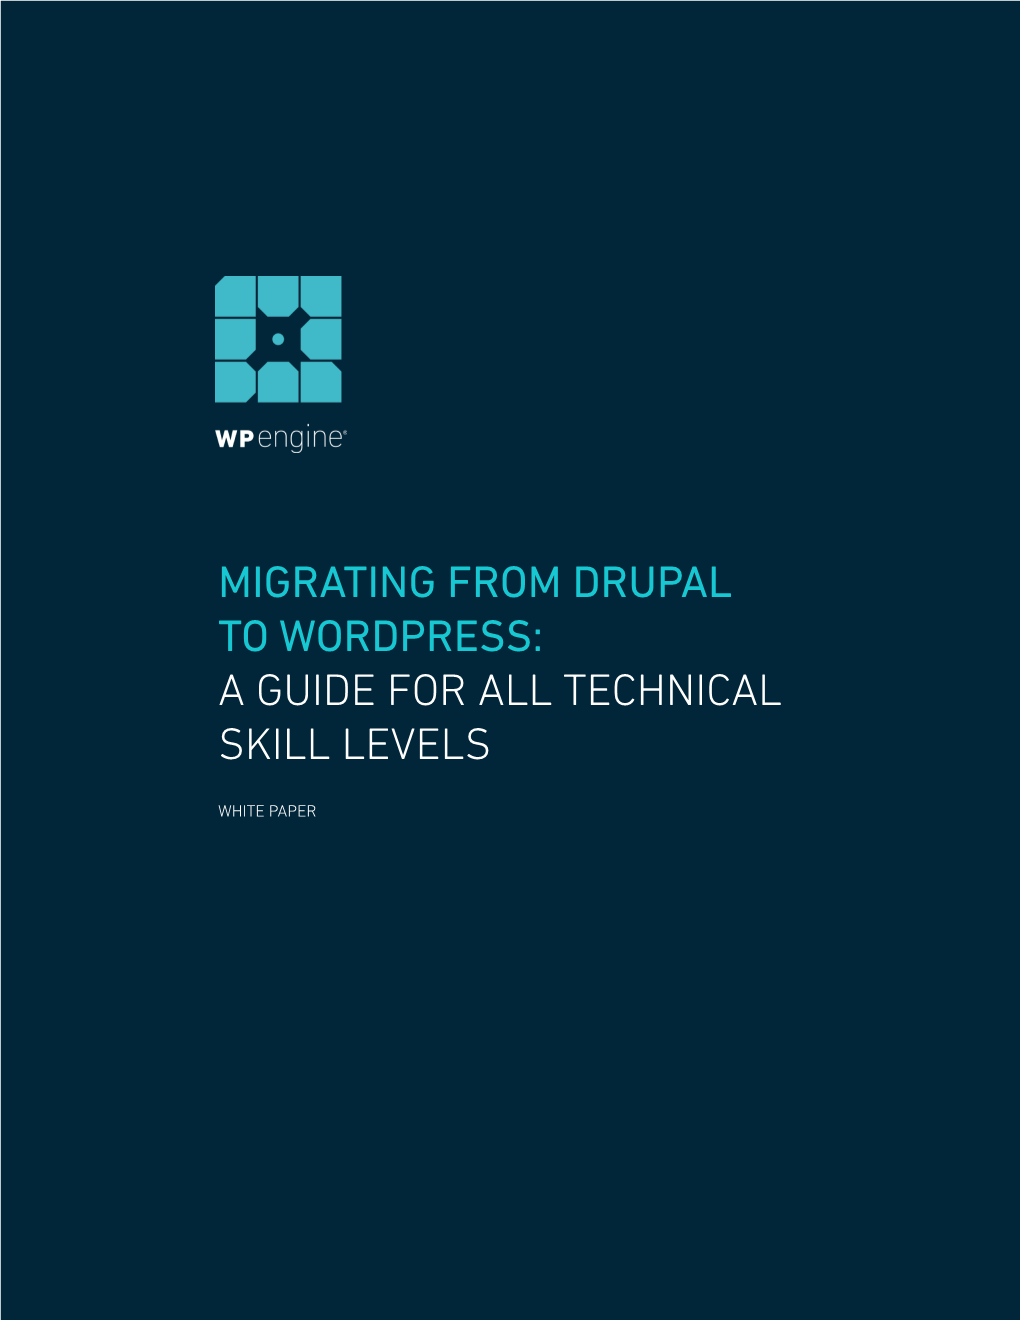 Migrating from Drupal to Wordpress: a Guide for All Technical Skill Levels